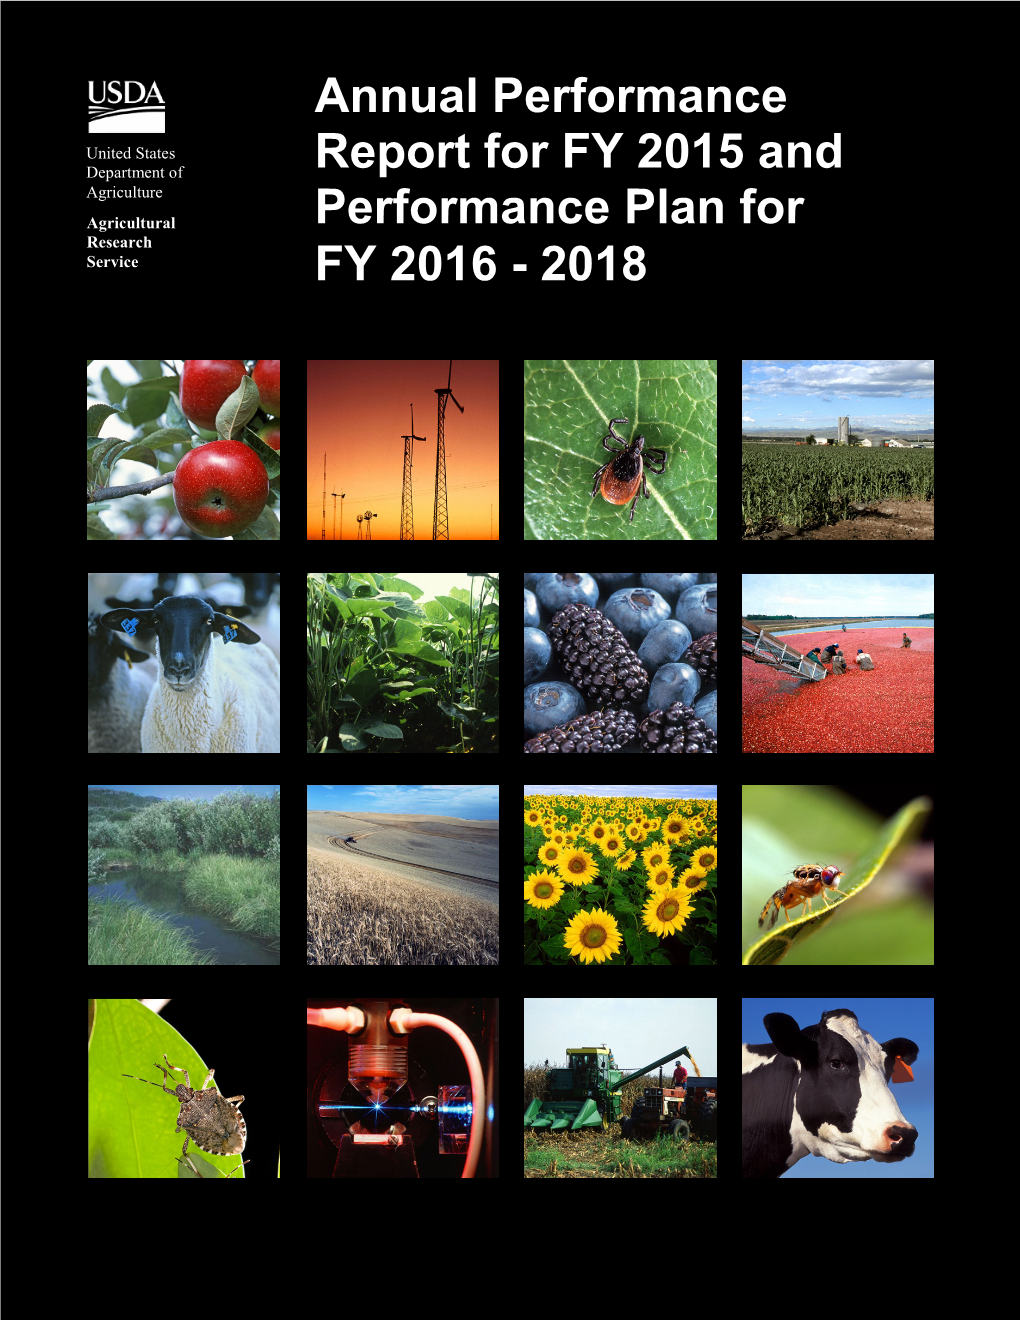 2015 Annual Performance Report and 2016-2018 Performance Plan